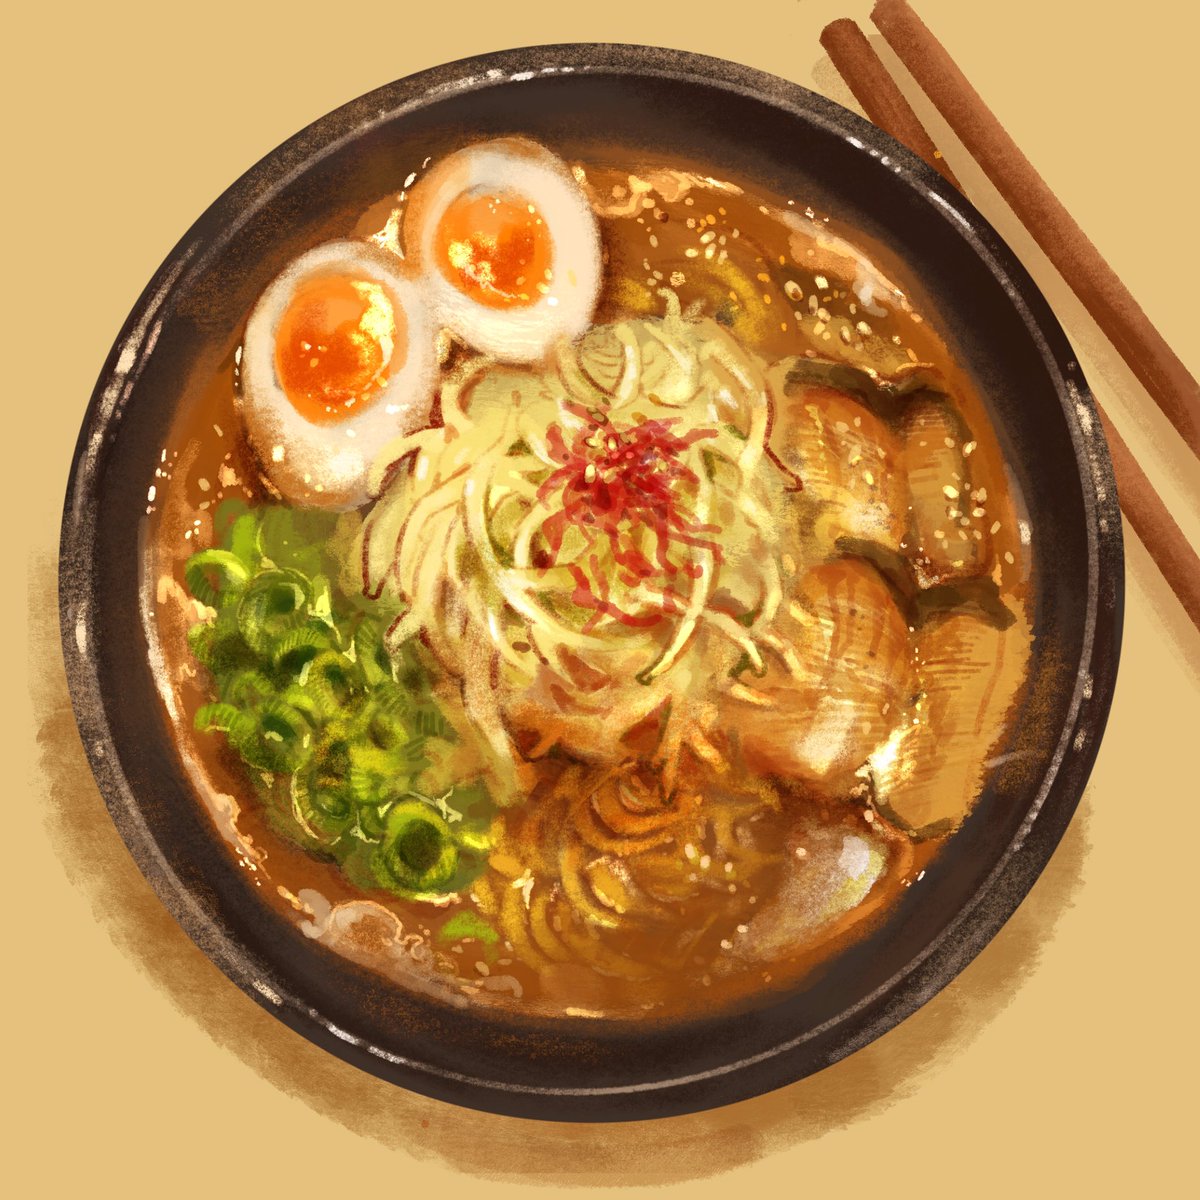 ‘One ramen a day 🍜🍜🍜🍜...’

Finished the ramen set! I drew the first one around march, I think? (Or April?) glad to finally complete the set and made 4 bowls in total! Enjoy and savour the ramen!